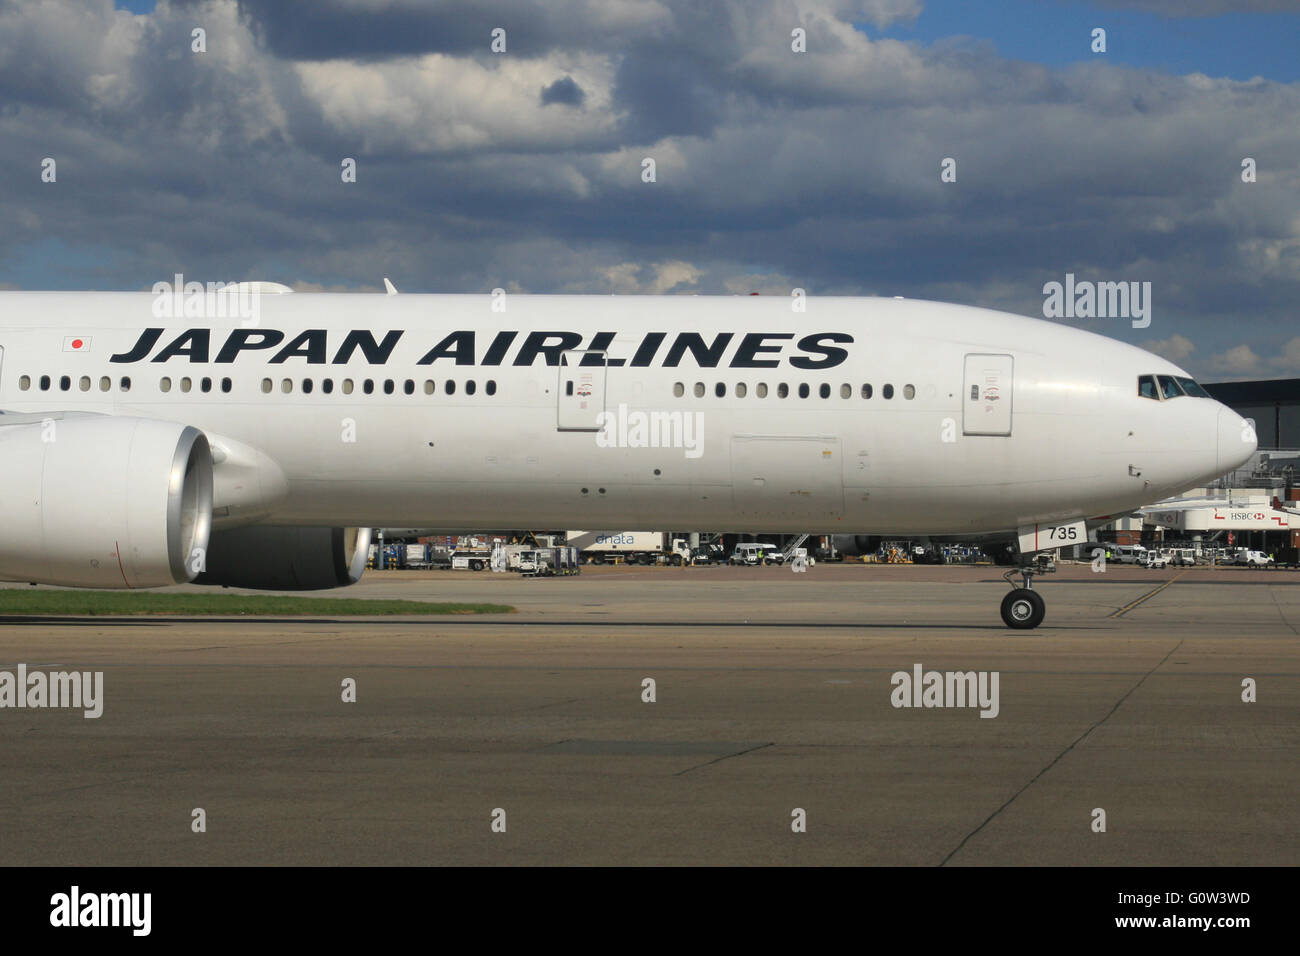 JAL JAPAN AIRLINES Stock Photo